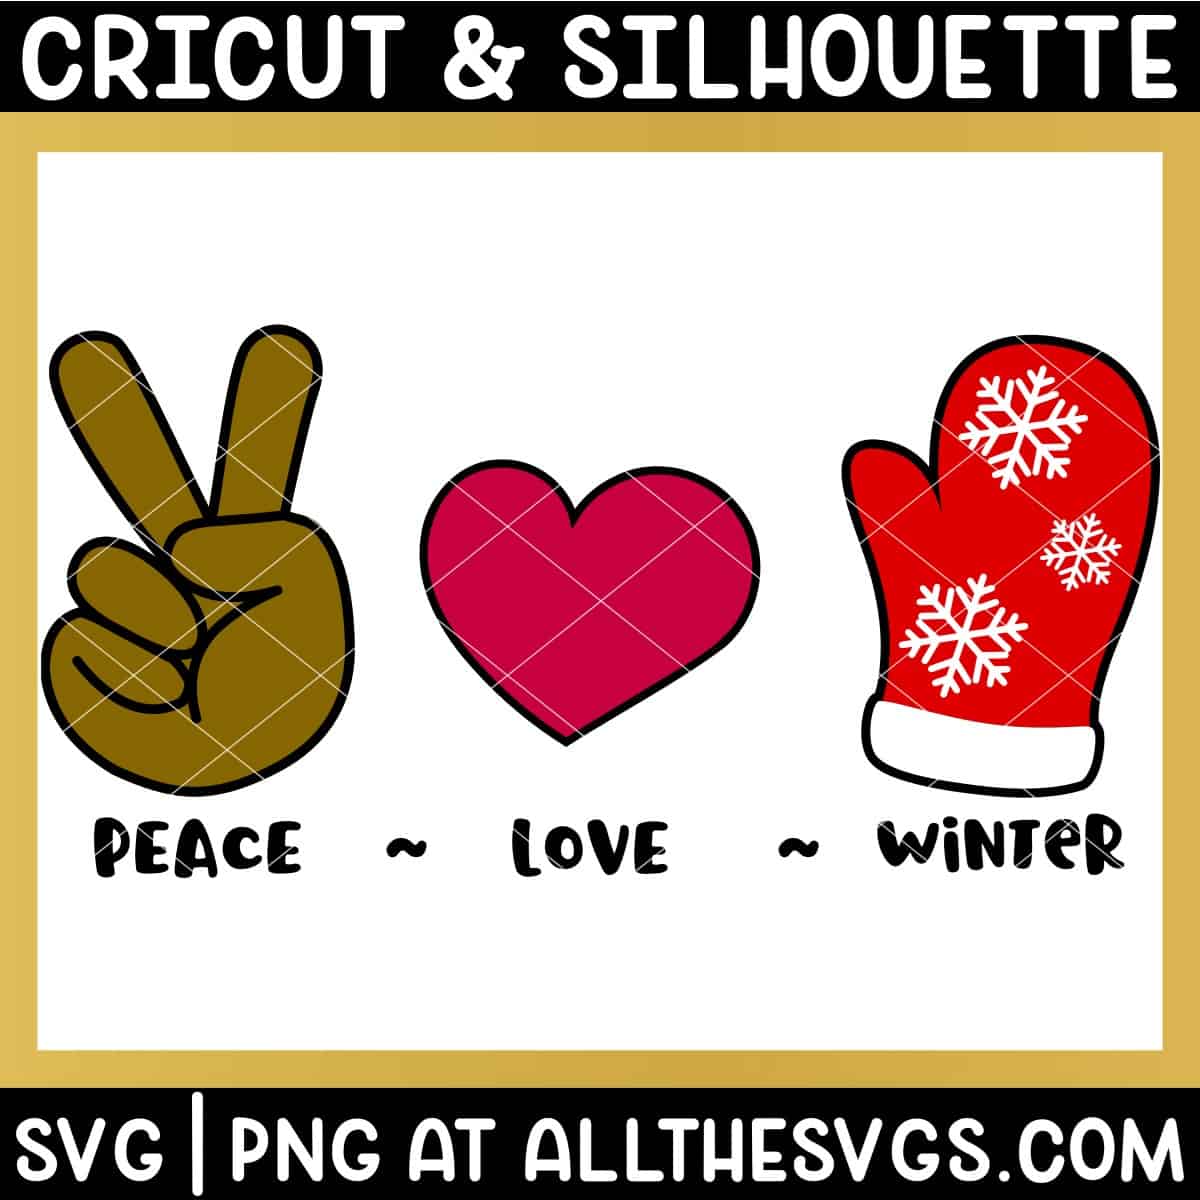 peace, love, winter svg file with mitten.